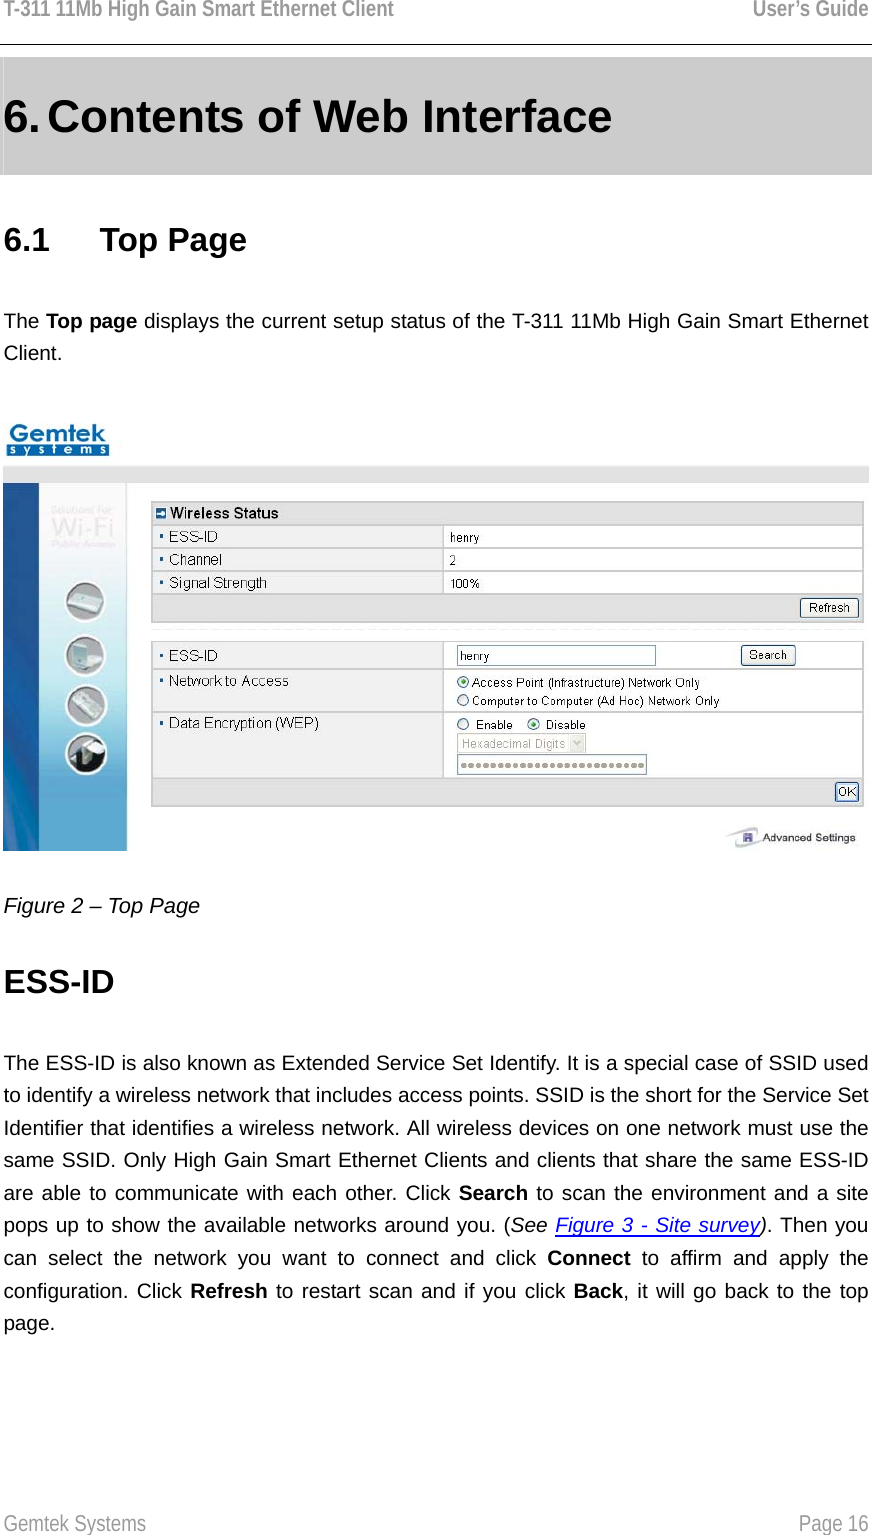 T-311 11Mb High Gain Smart Ethernet Client    User’s Guide  Gemtek Systems    Page 16  6. Contents of Web Interface 6.1   Top Page The Top page displays the current setup status of the T-311 11Mb High Gain Smart Ethernet Client.  Figure 2 – Top Page ESS-ID The ESS-ID is also known as Extended Service Set Identify. It is a special case of SSID used to identify a wireless network that includes access points. SSID is the short for the Service Set Identifier that identifies a wireless network. All wireless devices on one network must use the same SSID. Only High Gain Smart Ethernet Clients and clients that share the same ESS-ID are able to communicate with each other. Click Search to scan the environment and a site pops up to show the available networks around you. (See Figure 3 - Site survey). Then you can select the network you want to connect and click Connect to affirm and apply the configuration. Click Refresh to restart scan and if you click Back, it will go back to the top page.  